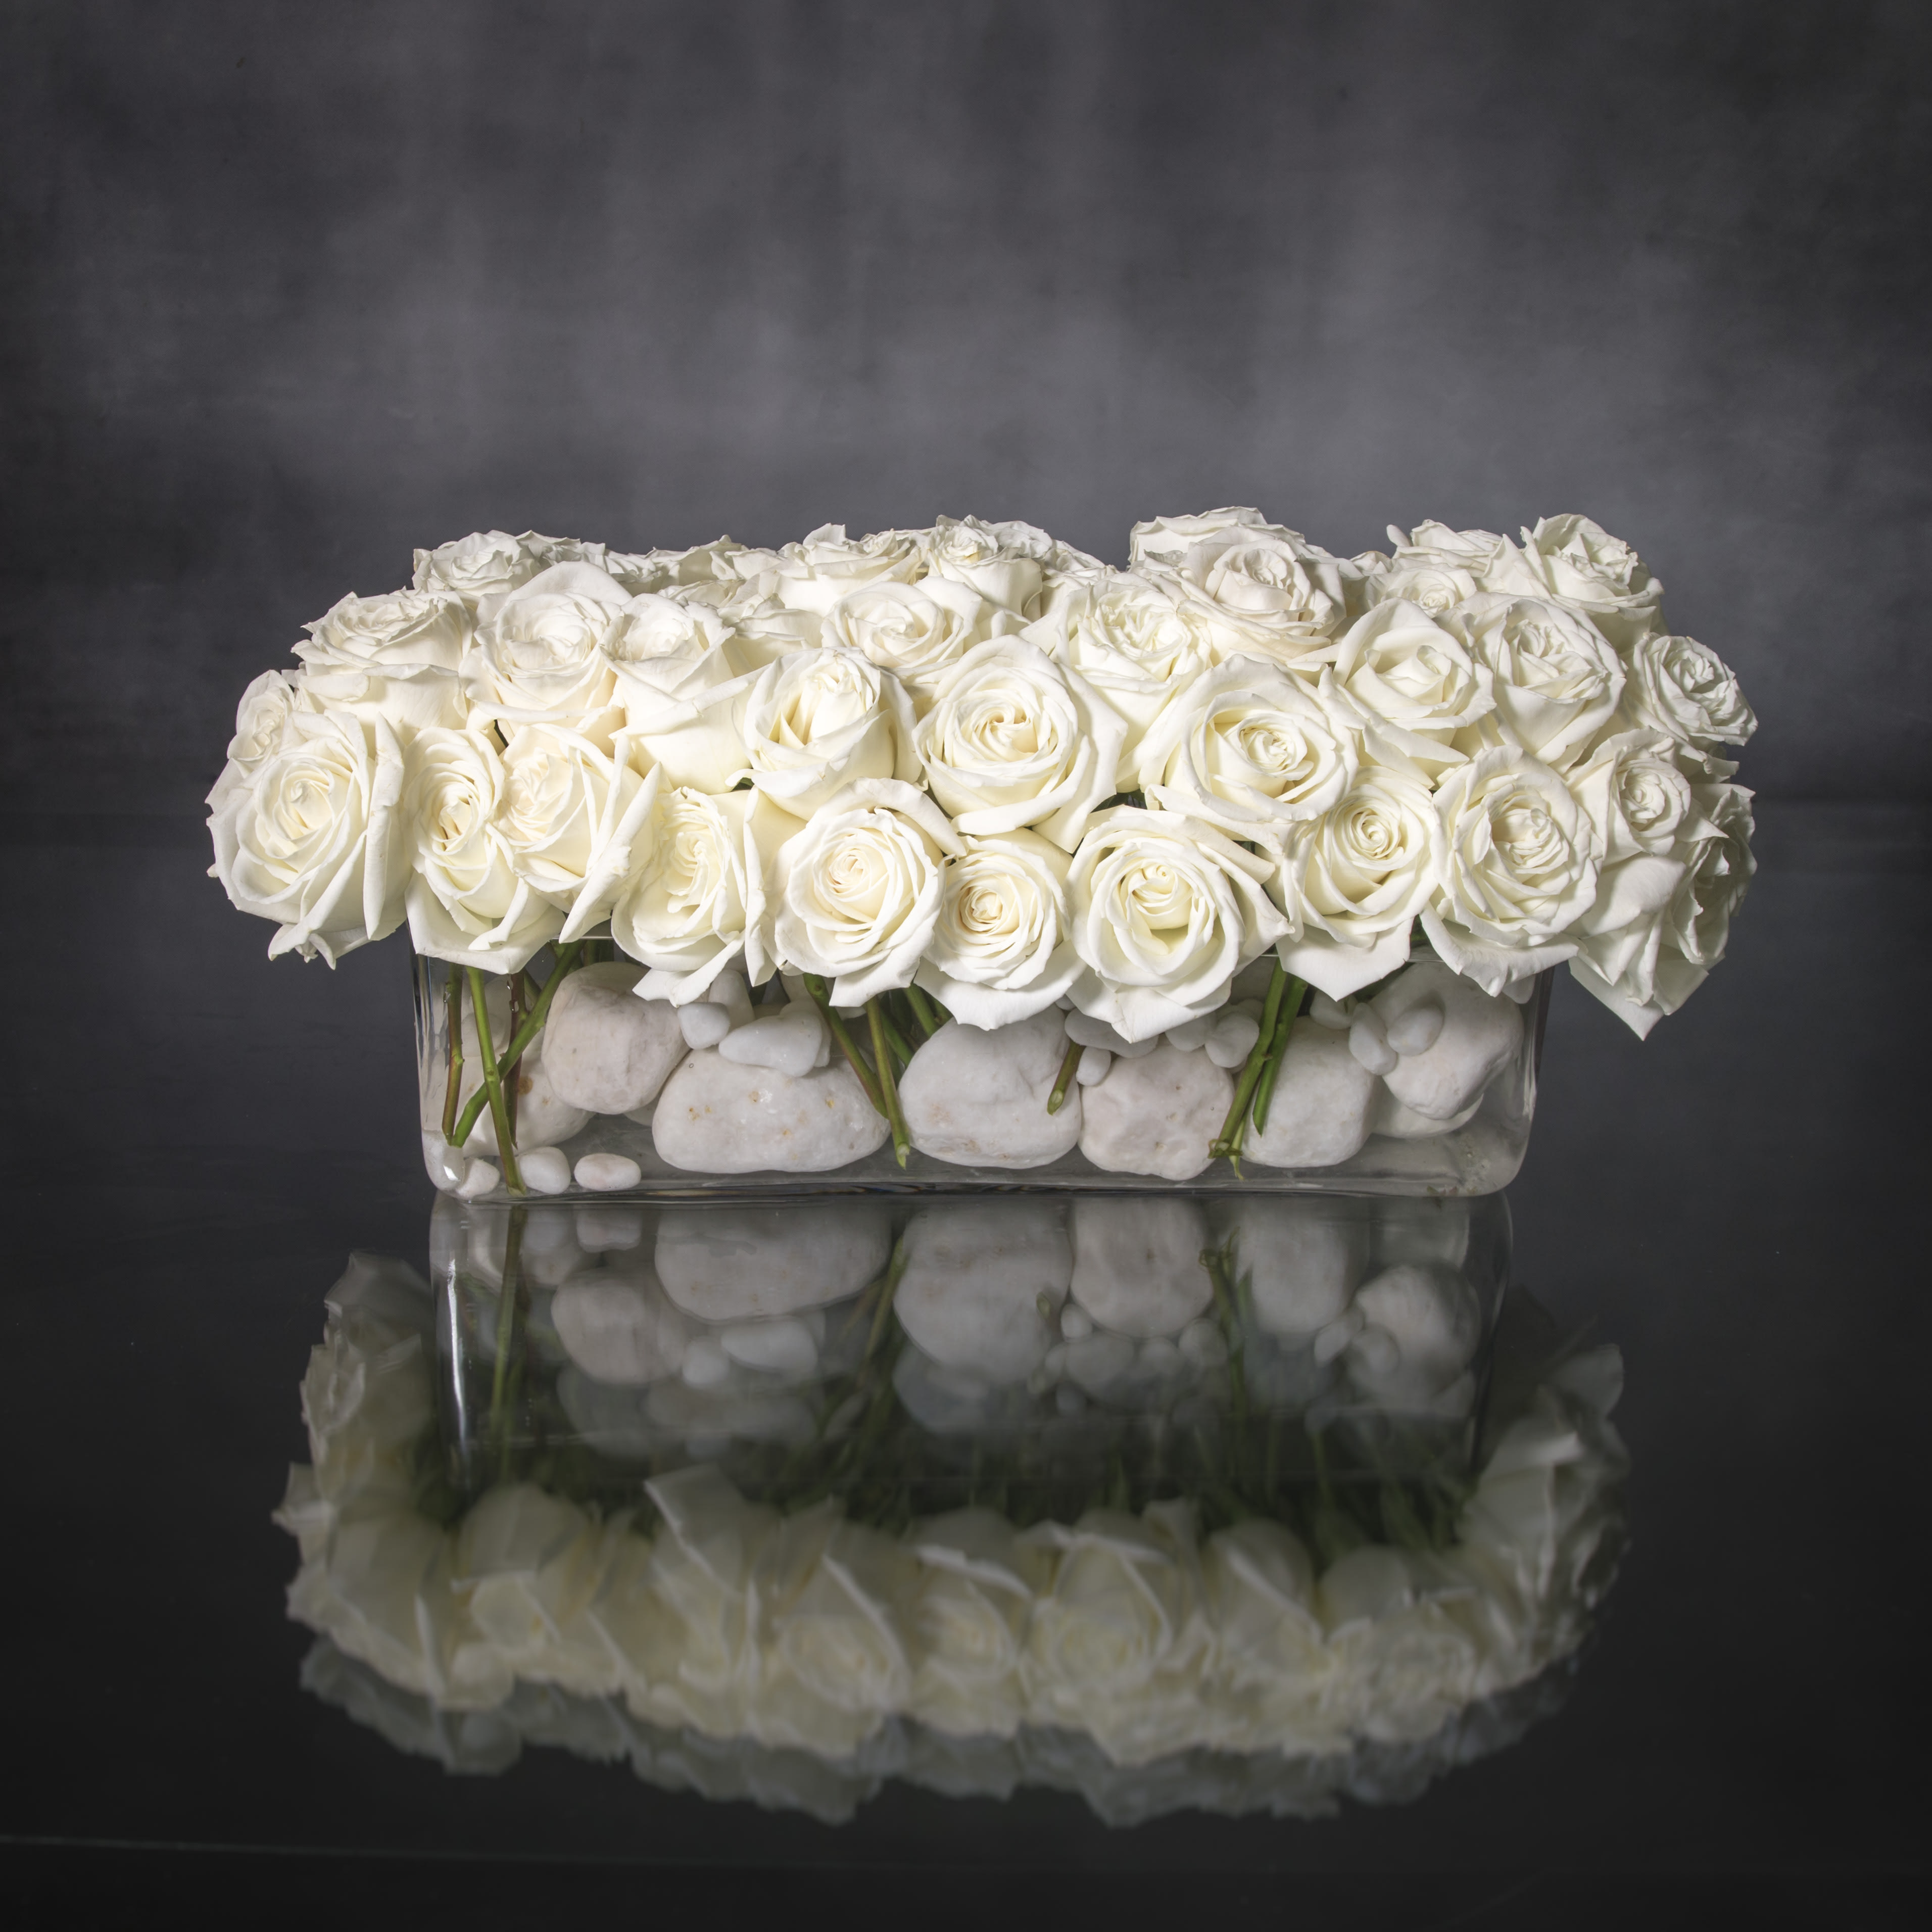 Crème de la Crème - 100 Roses  - This sophisticated design features 100 Creamy White Roses set in a rectangular glass vase. Your excellent taste is apparent for all occasions with this sophisticated, sleek floral gift.  